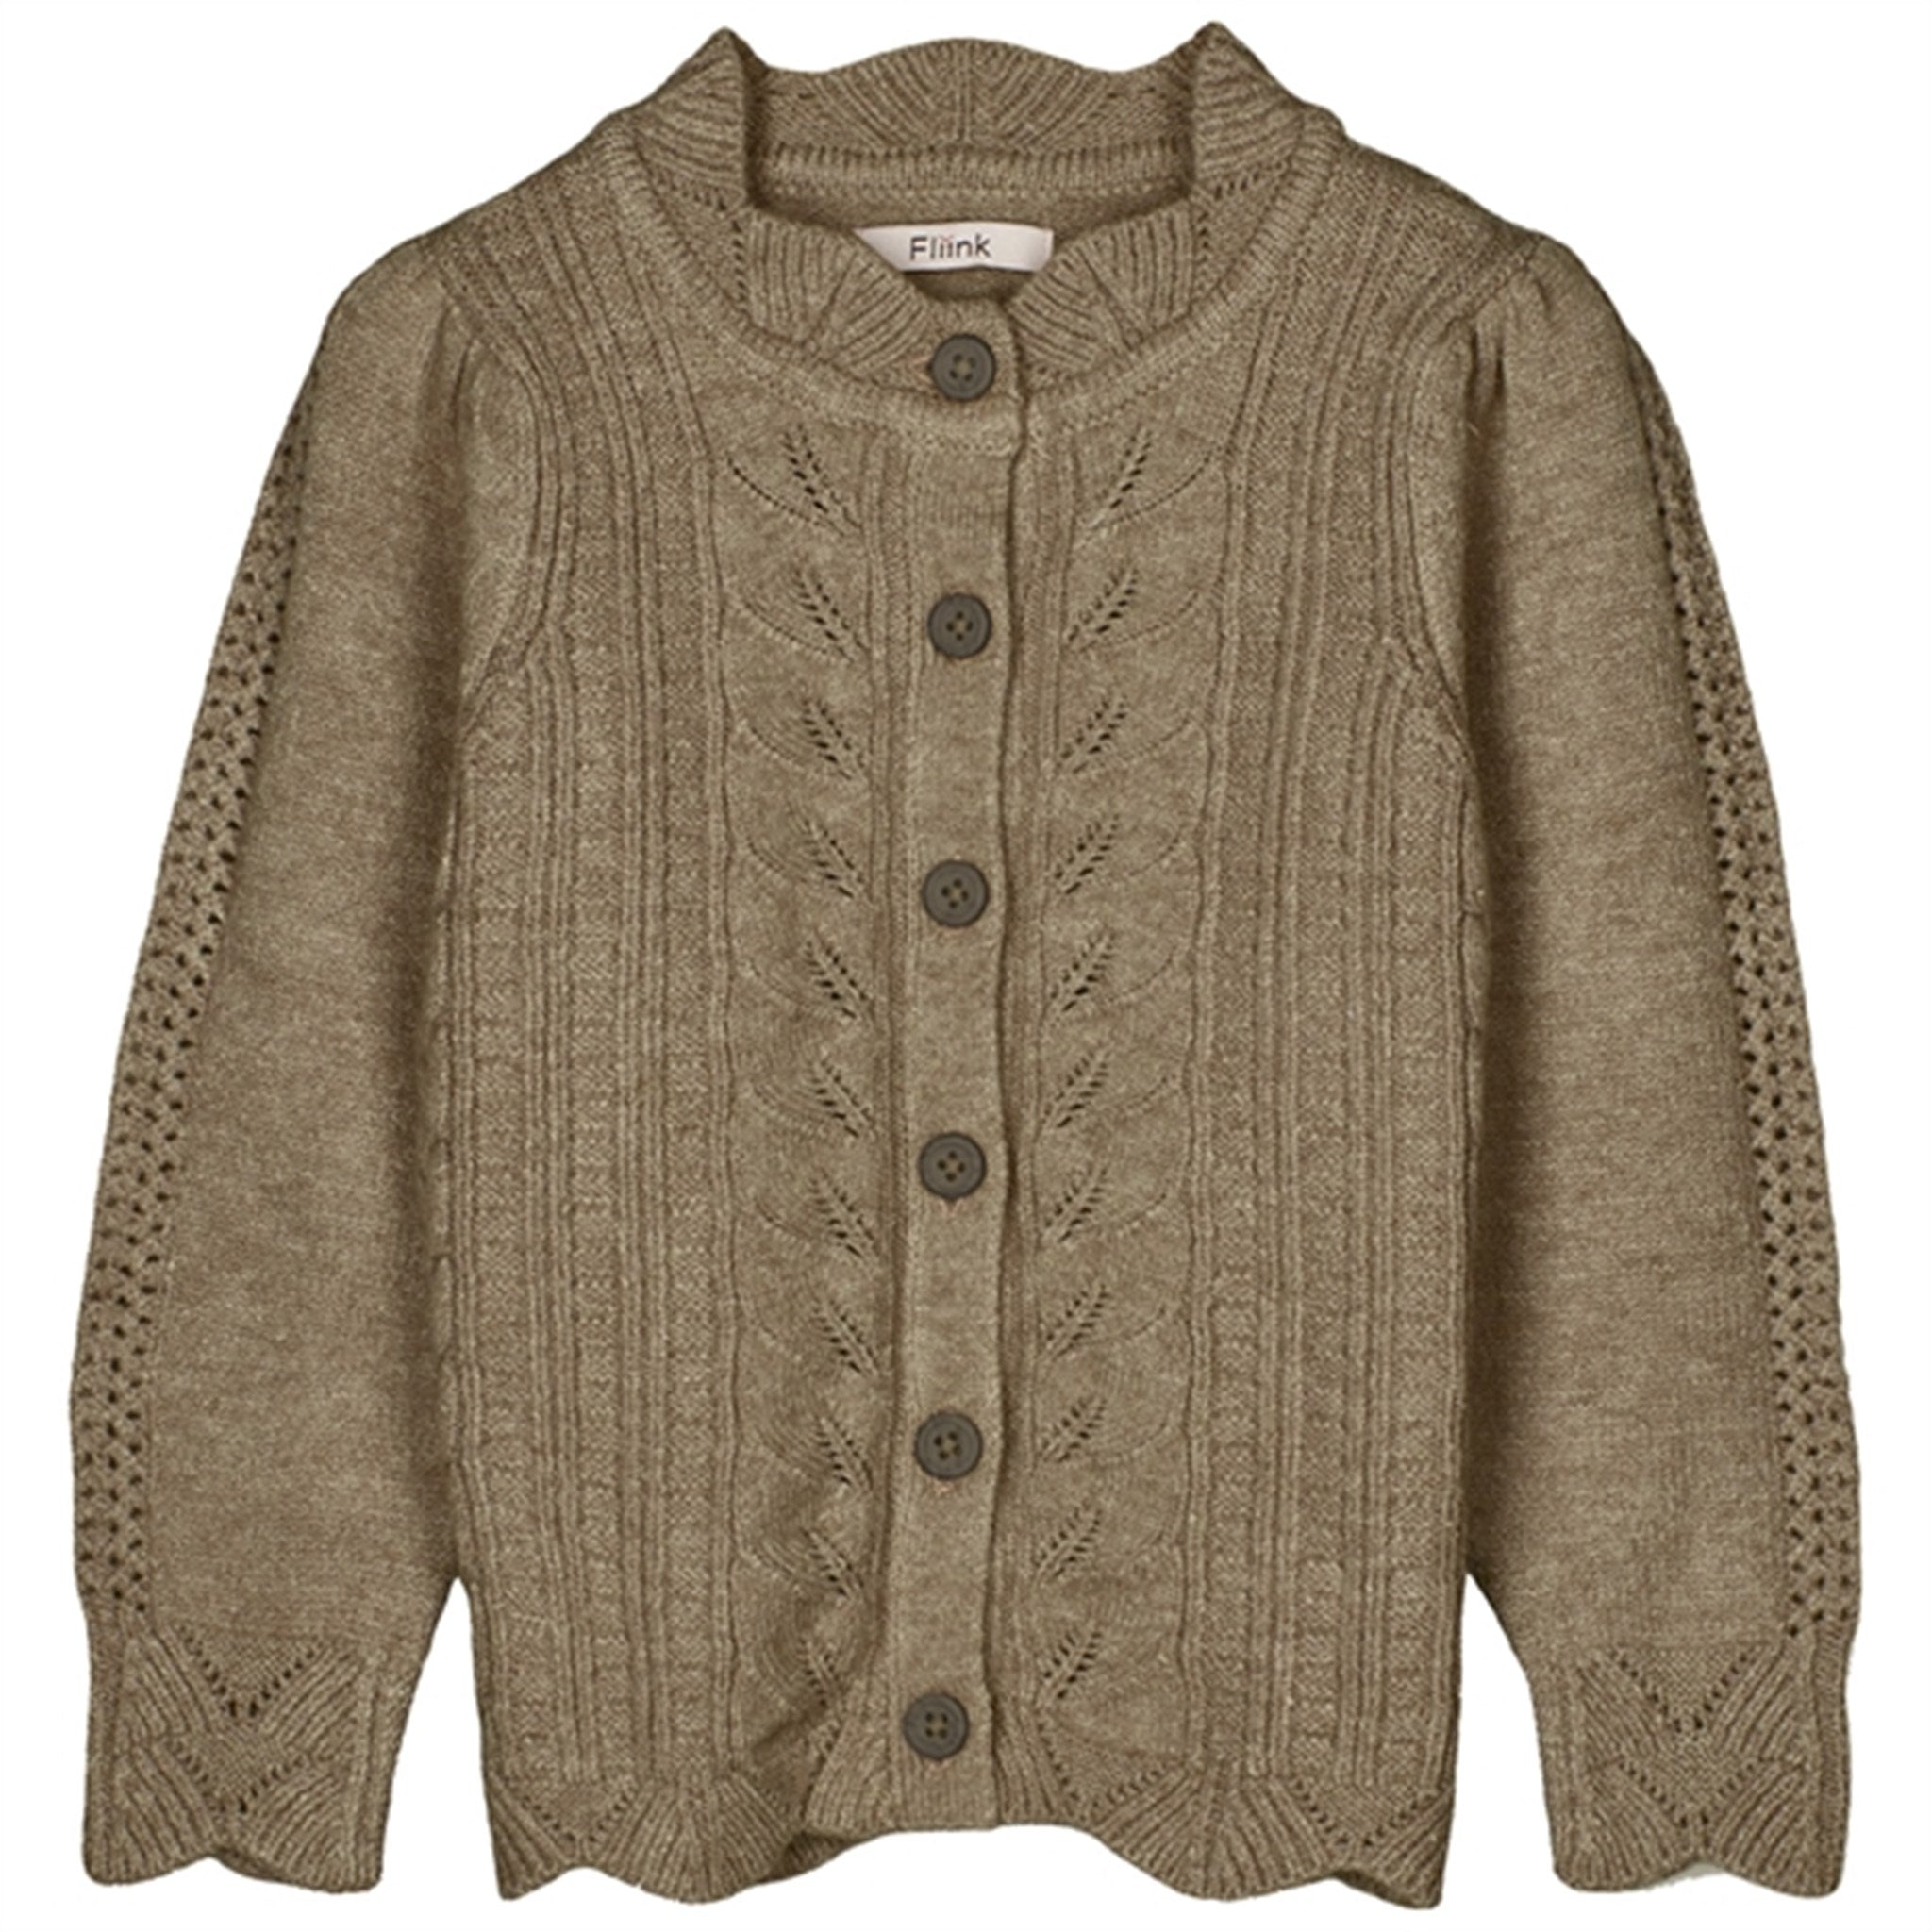 Fliink Fossil Lilly Knit Cardigan